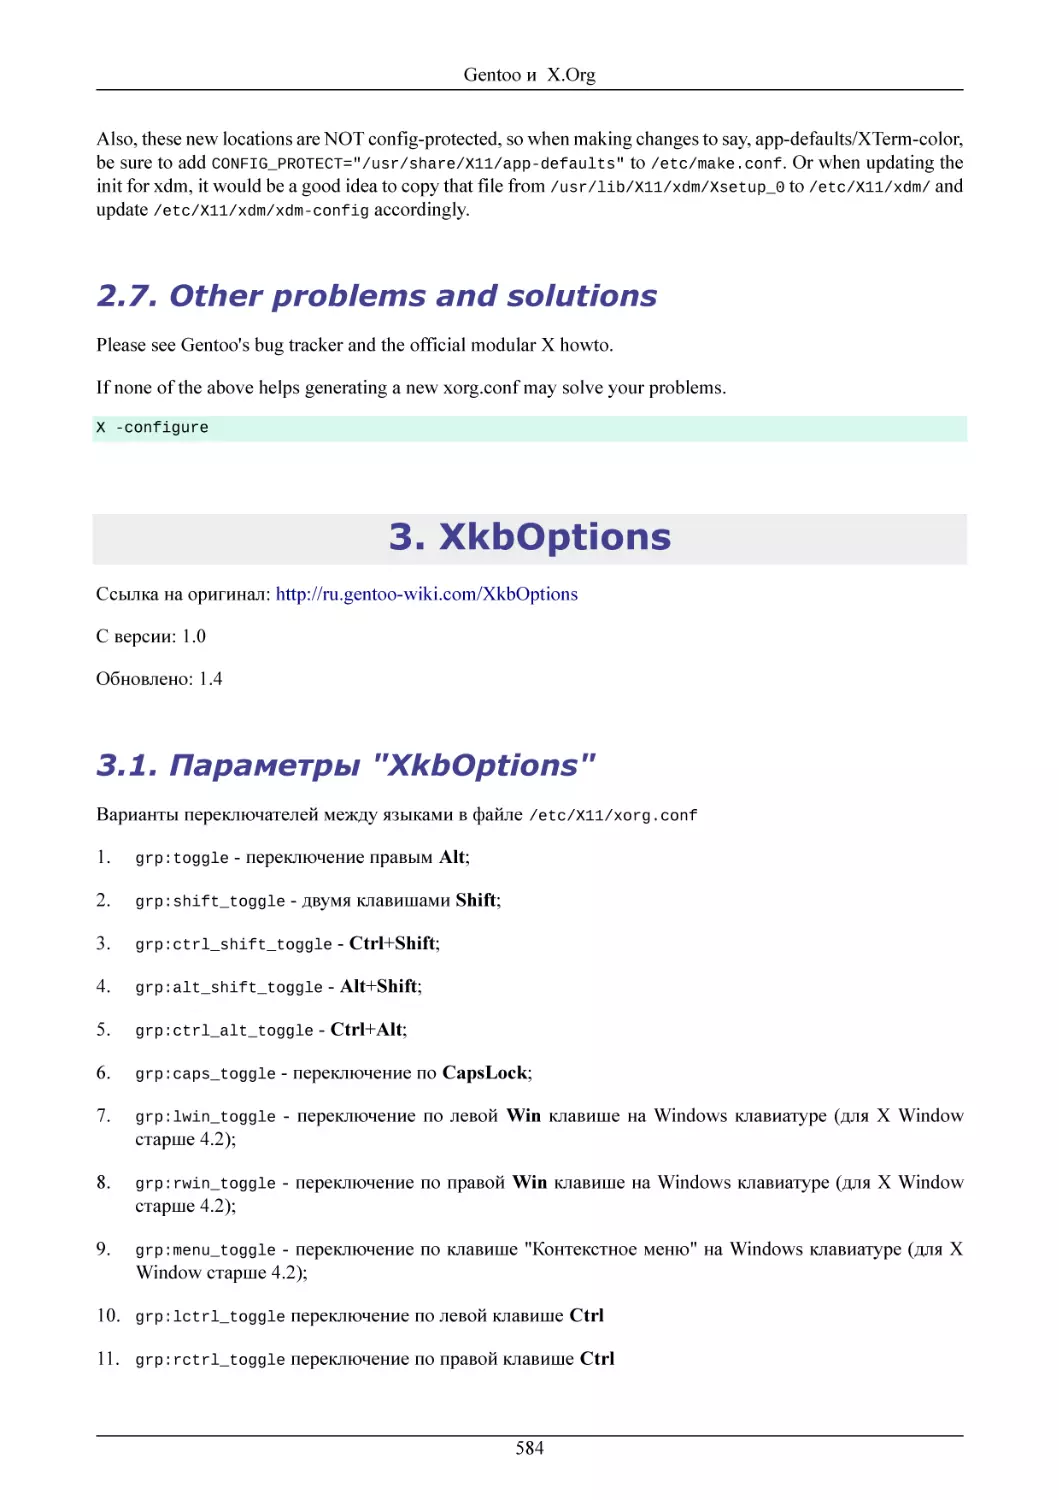 Other problems and solutions
XkbOptions
Параметры "XkbOptions"